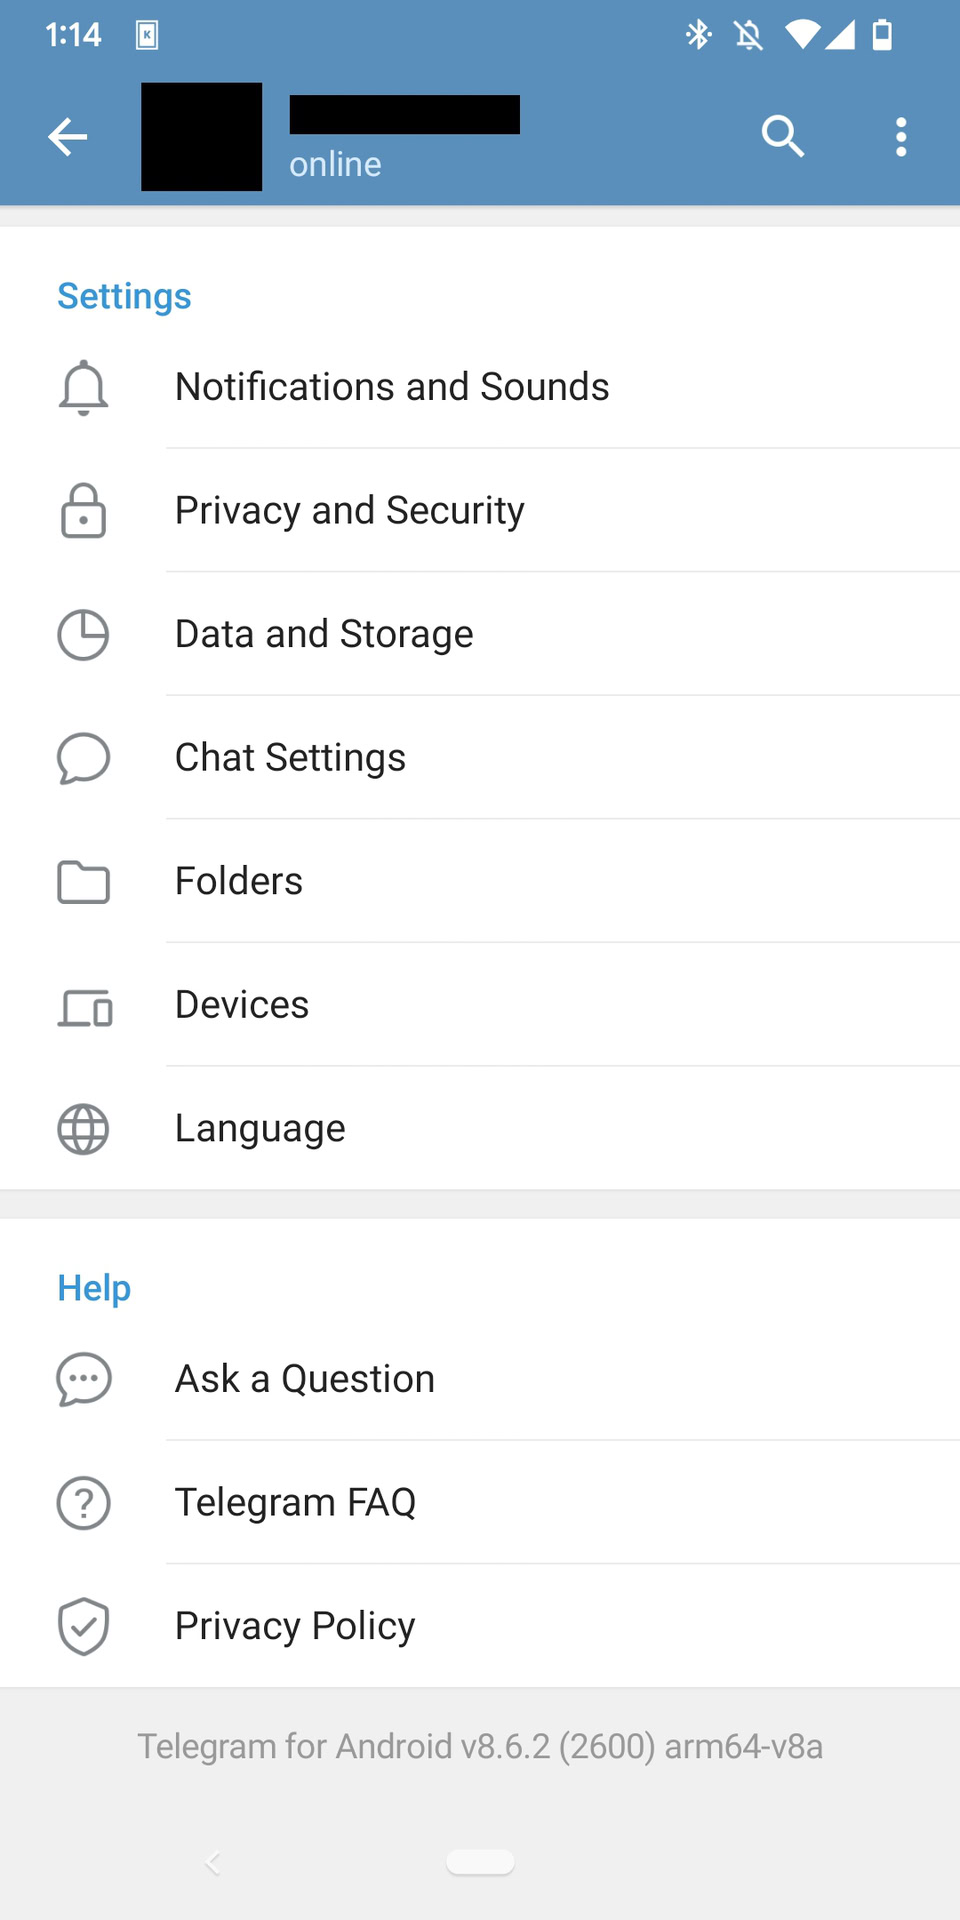 The Telegram settings menu opens with an option 